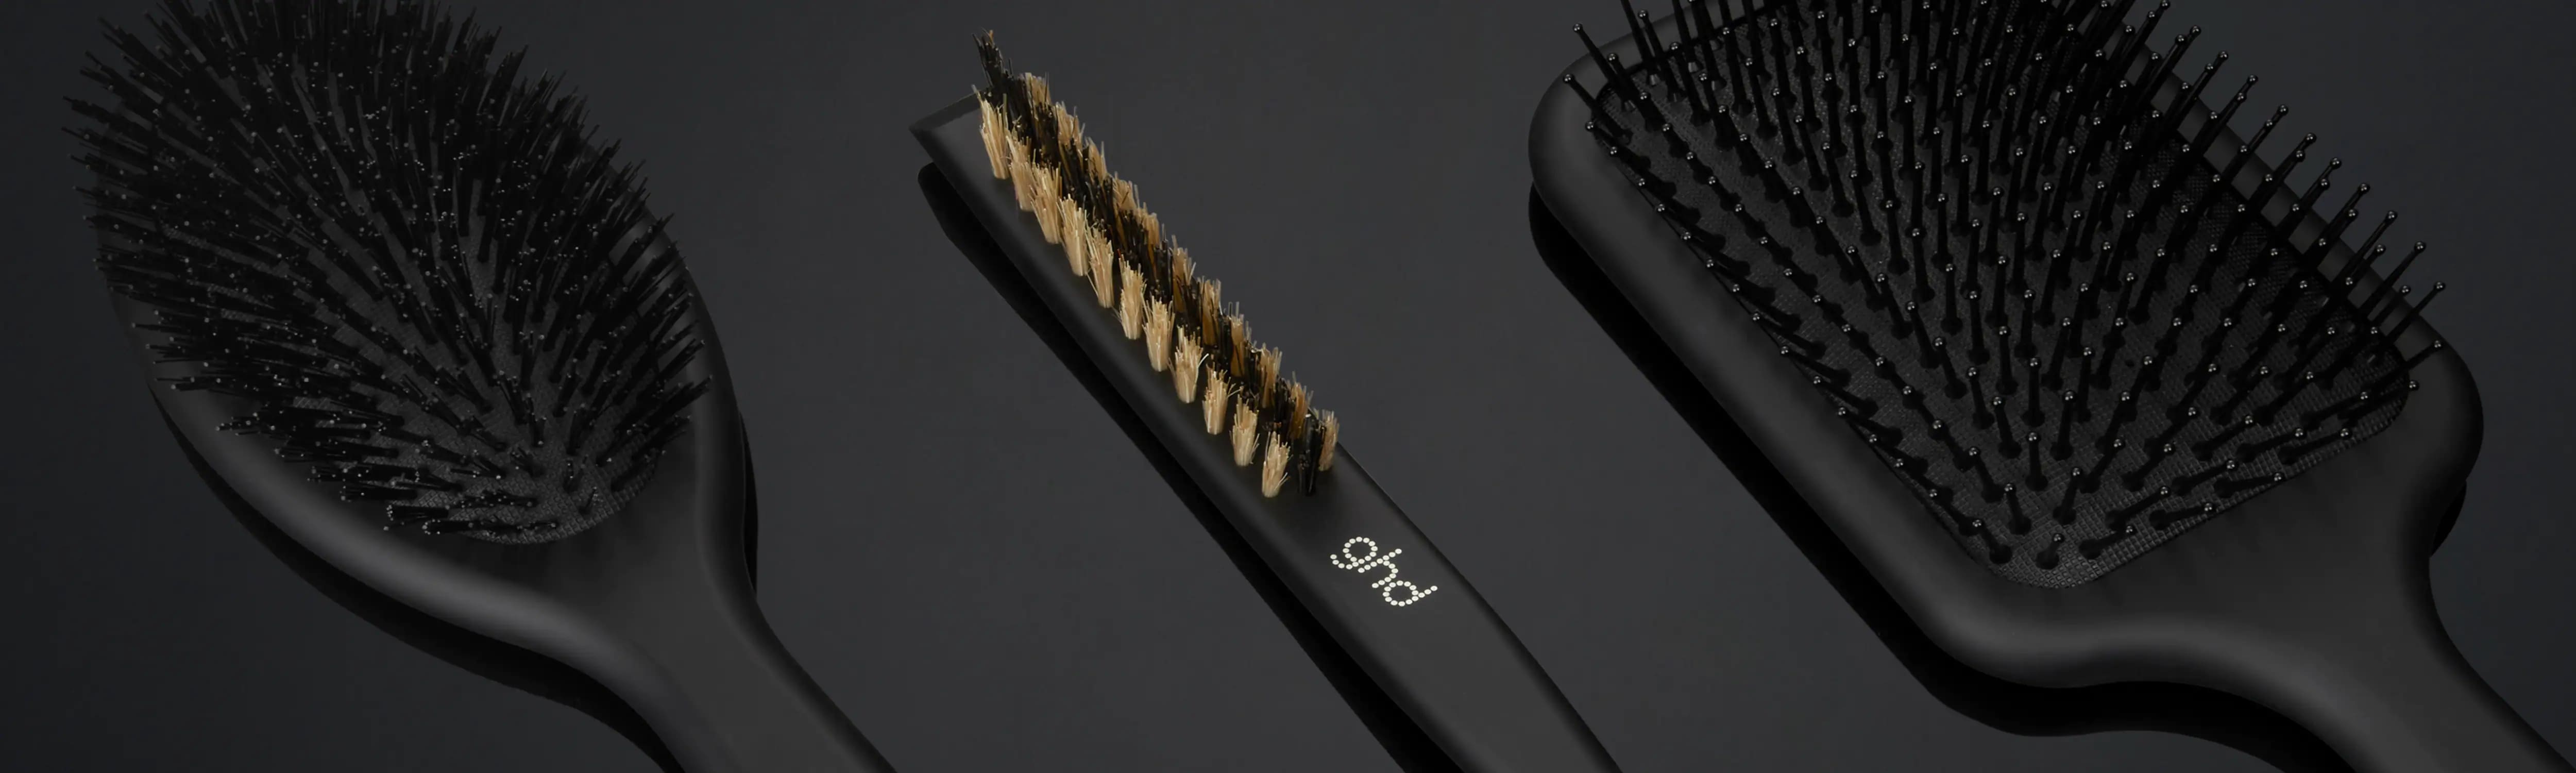 Brushes GHD · Coserty Beauty